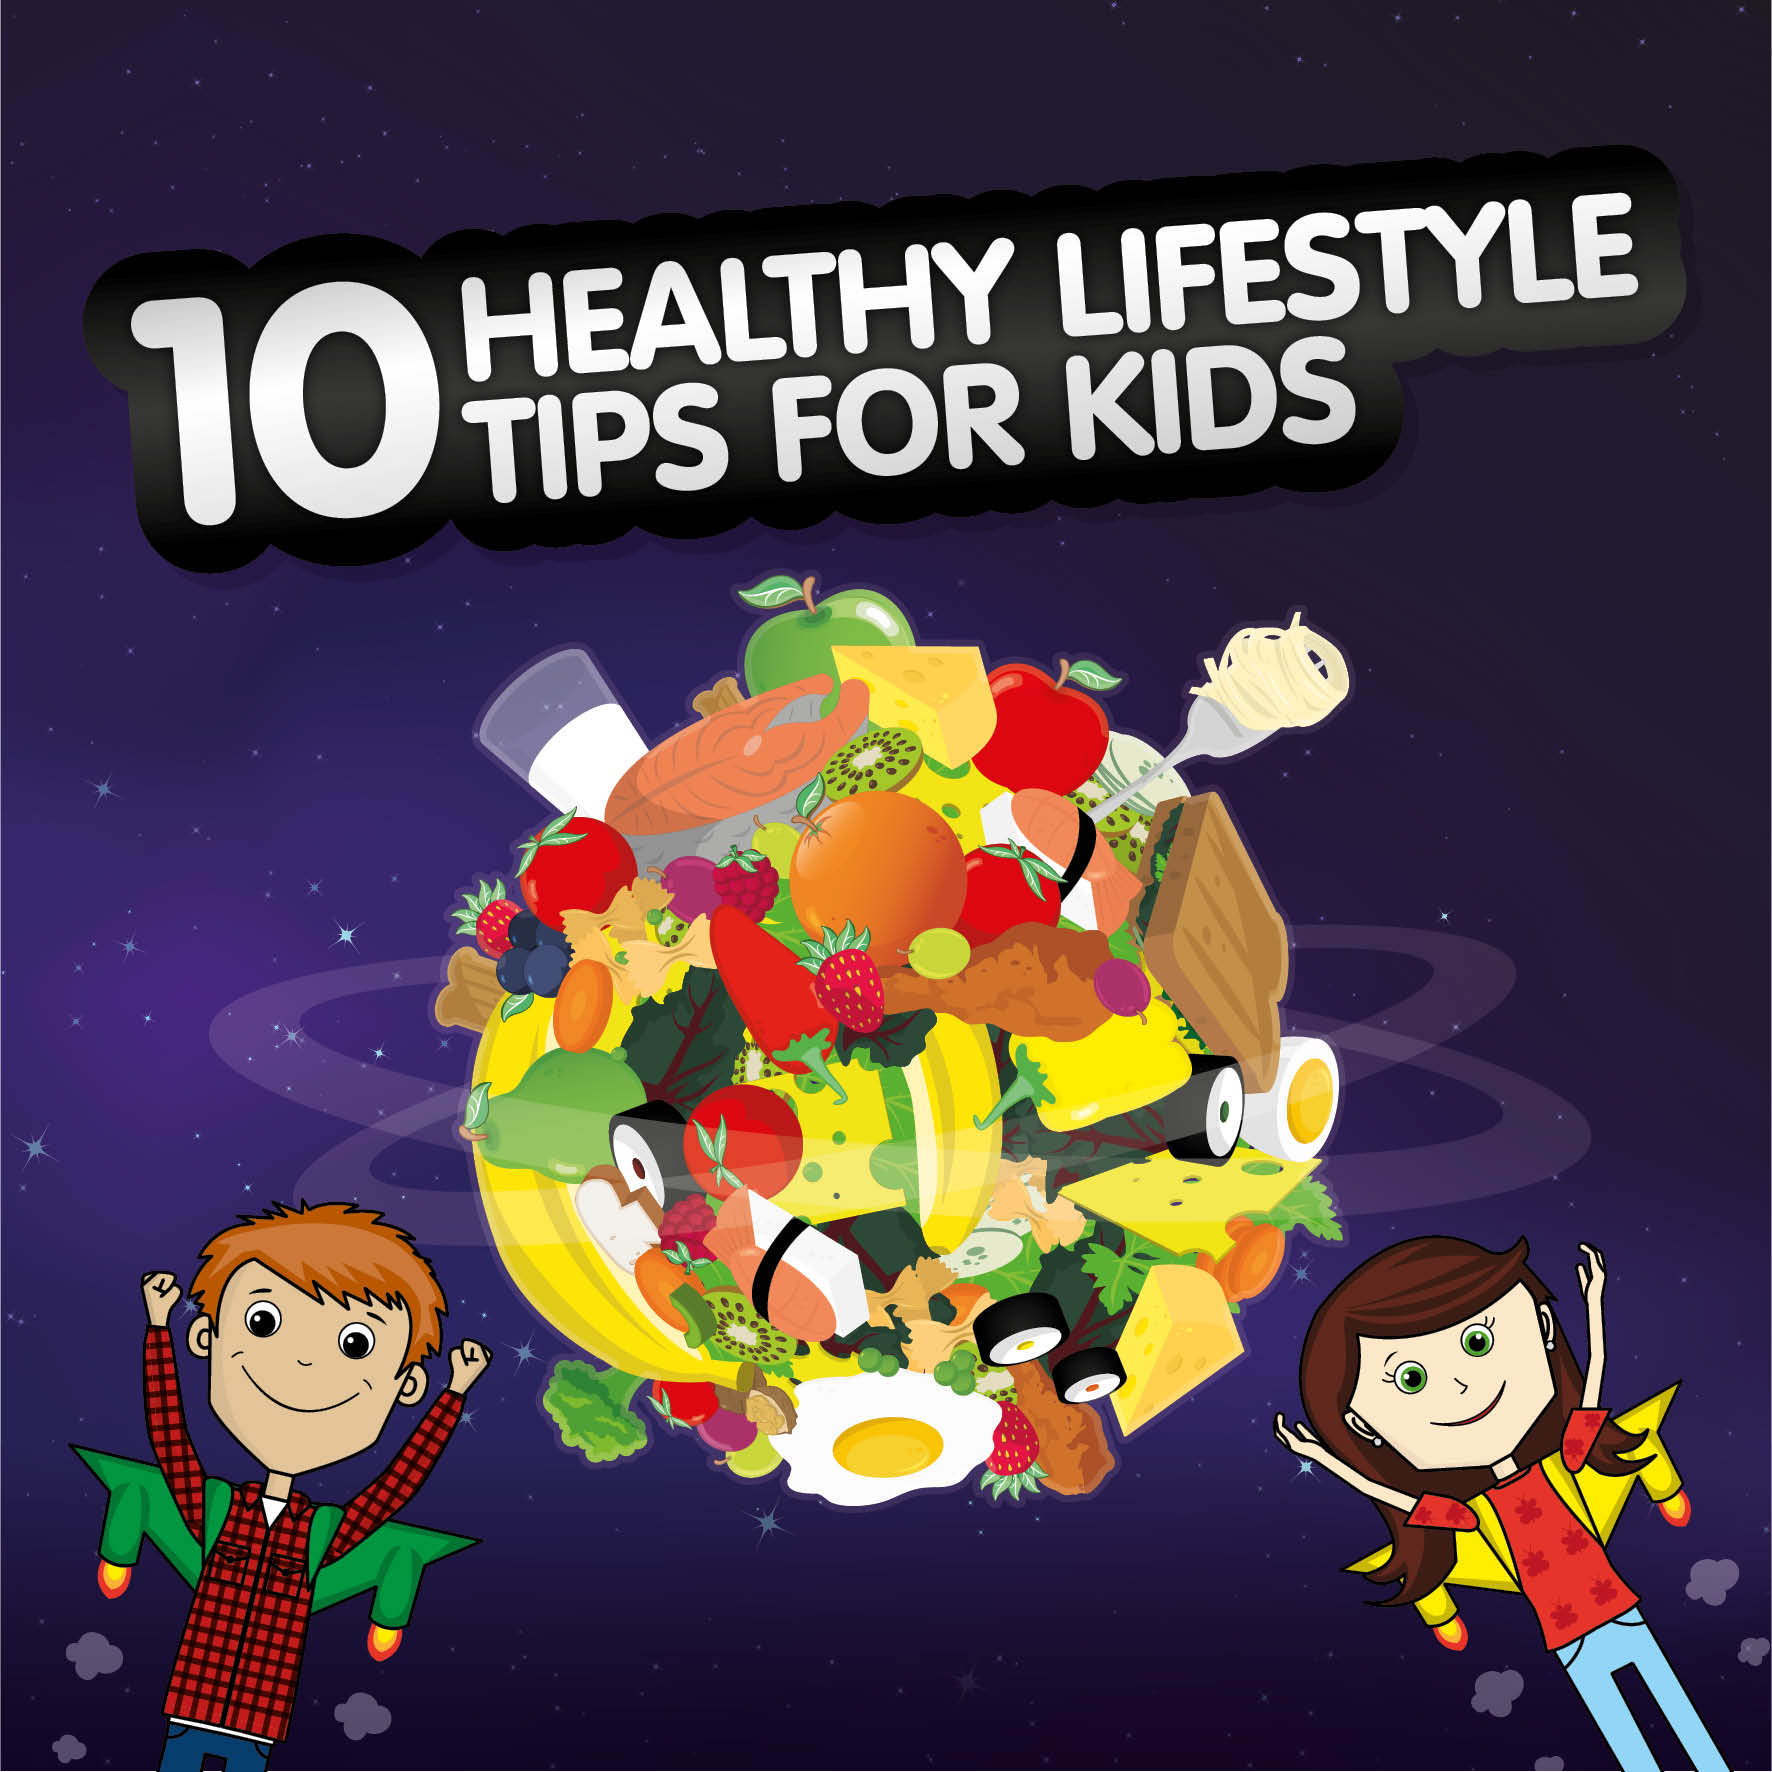 10 healthy lifestyle tips for kids